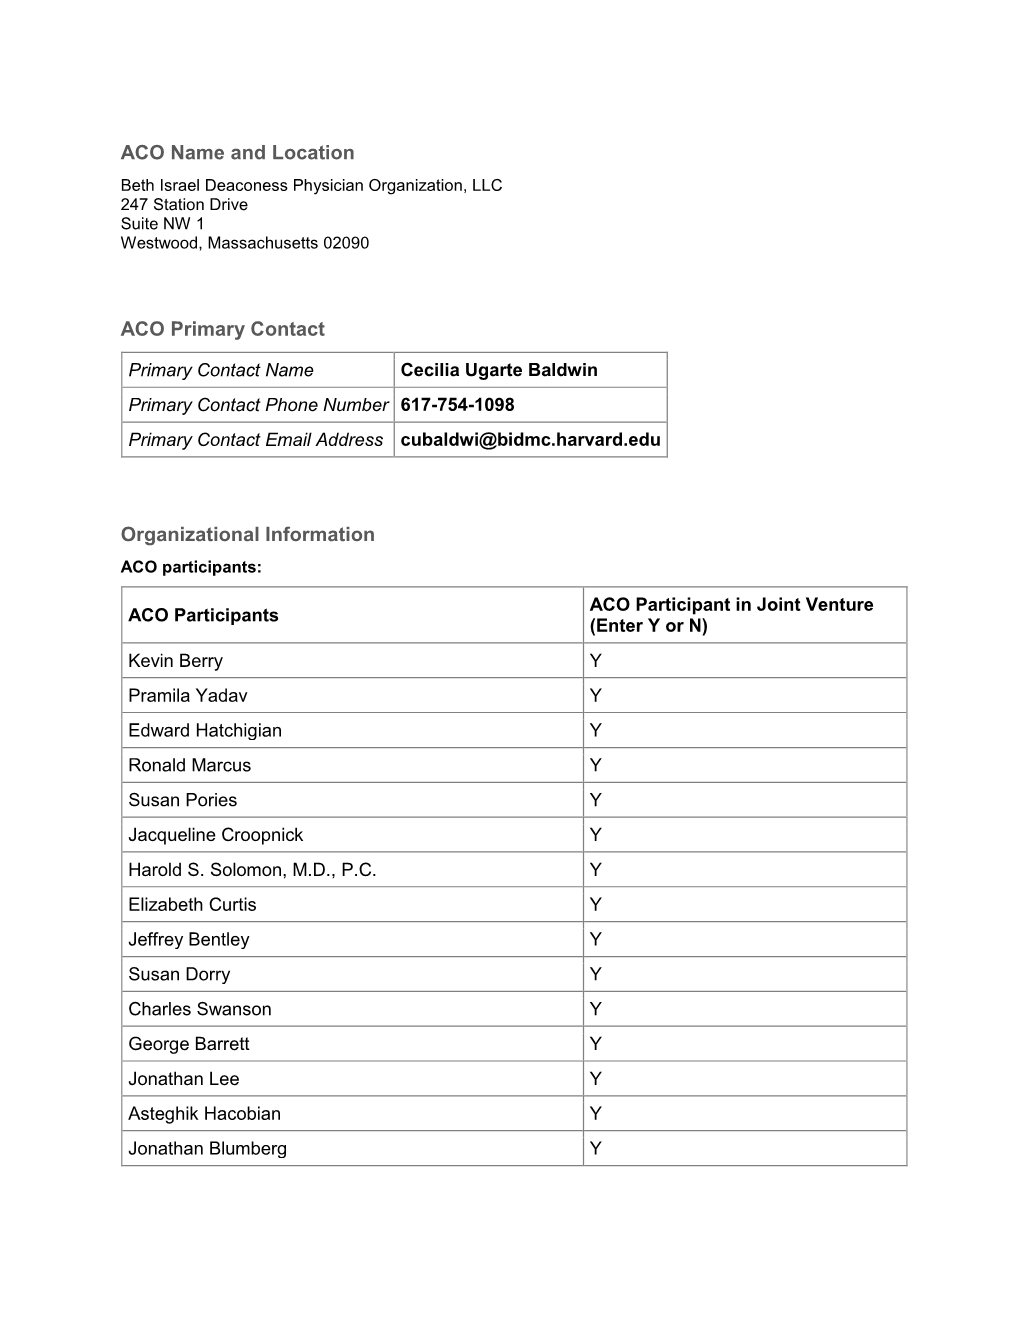 ACO Name and Location ACO Primary Contact Organizational Information